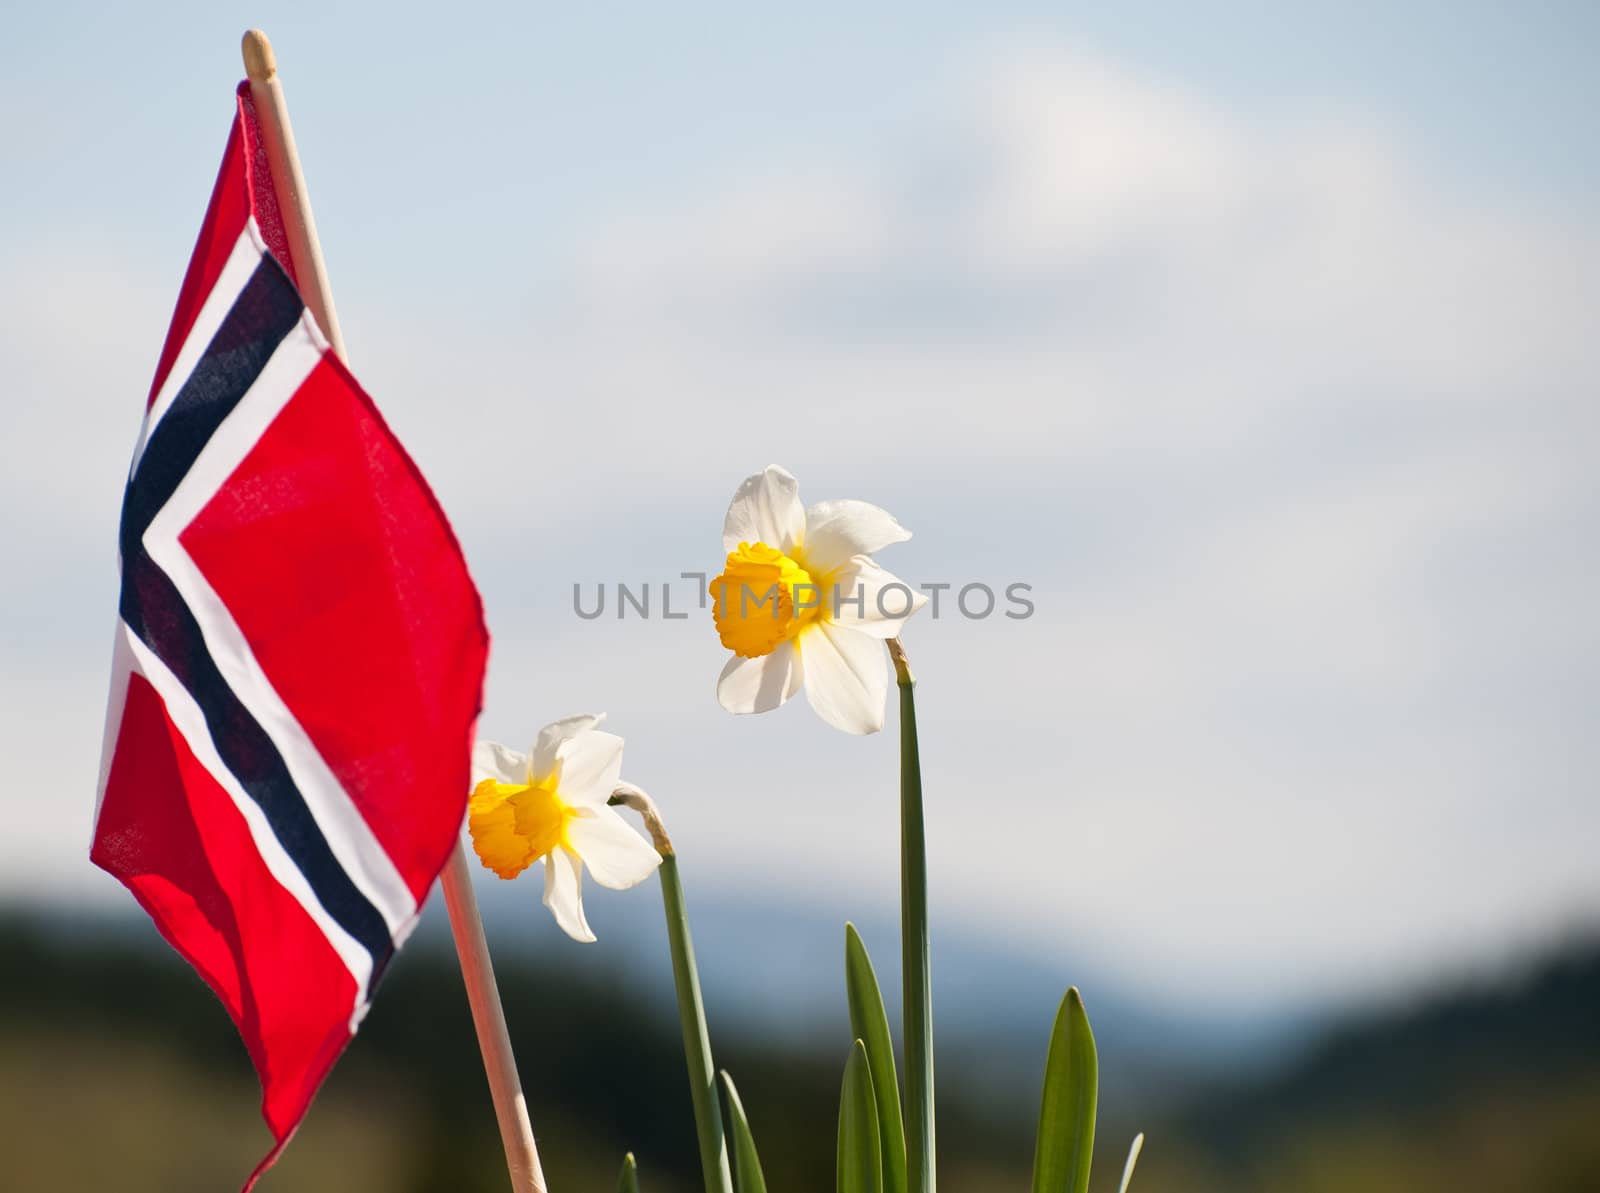 Noregian flag by kenneththunes